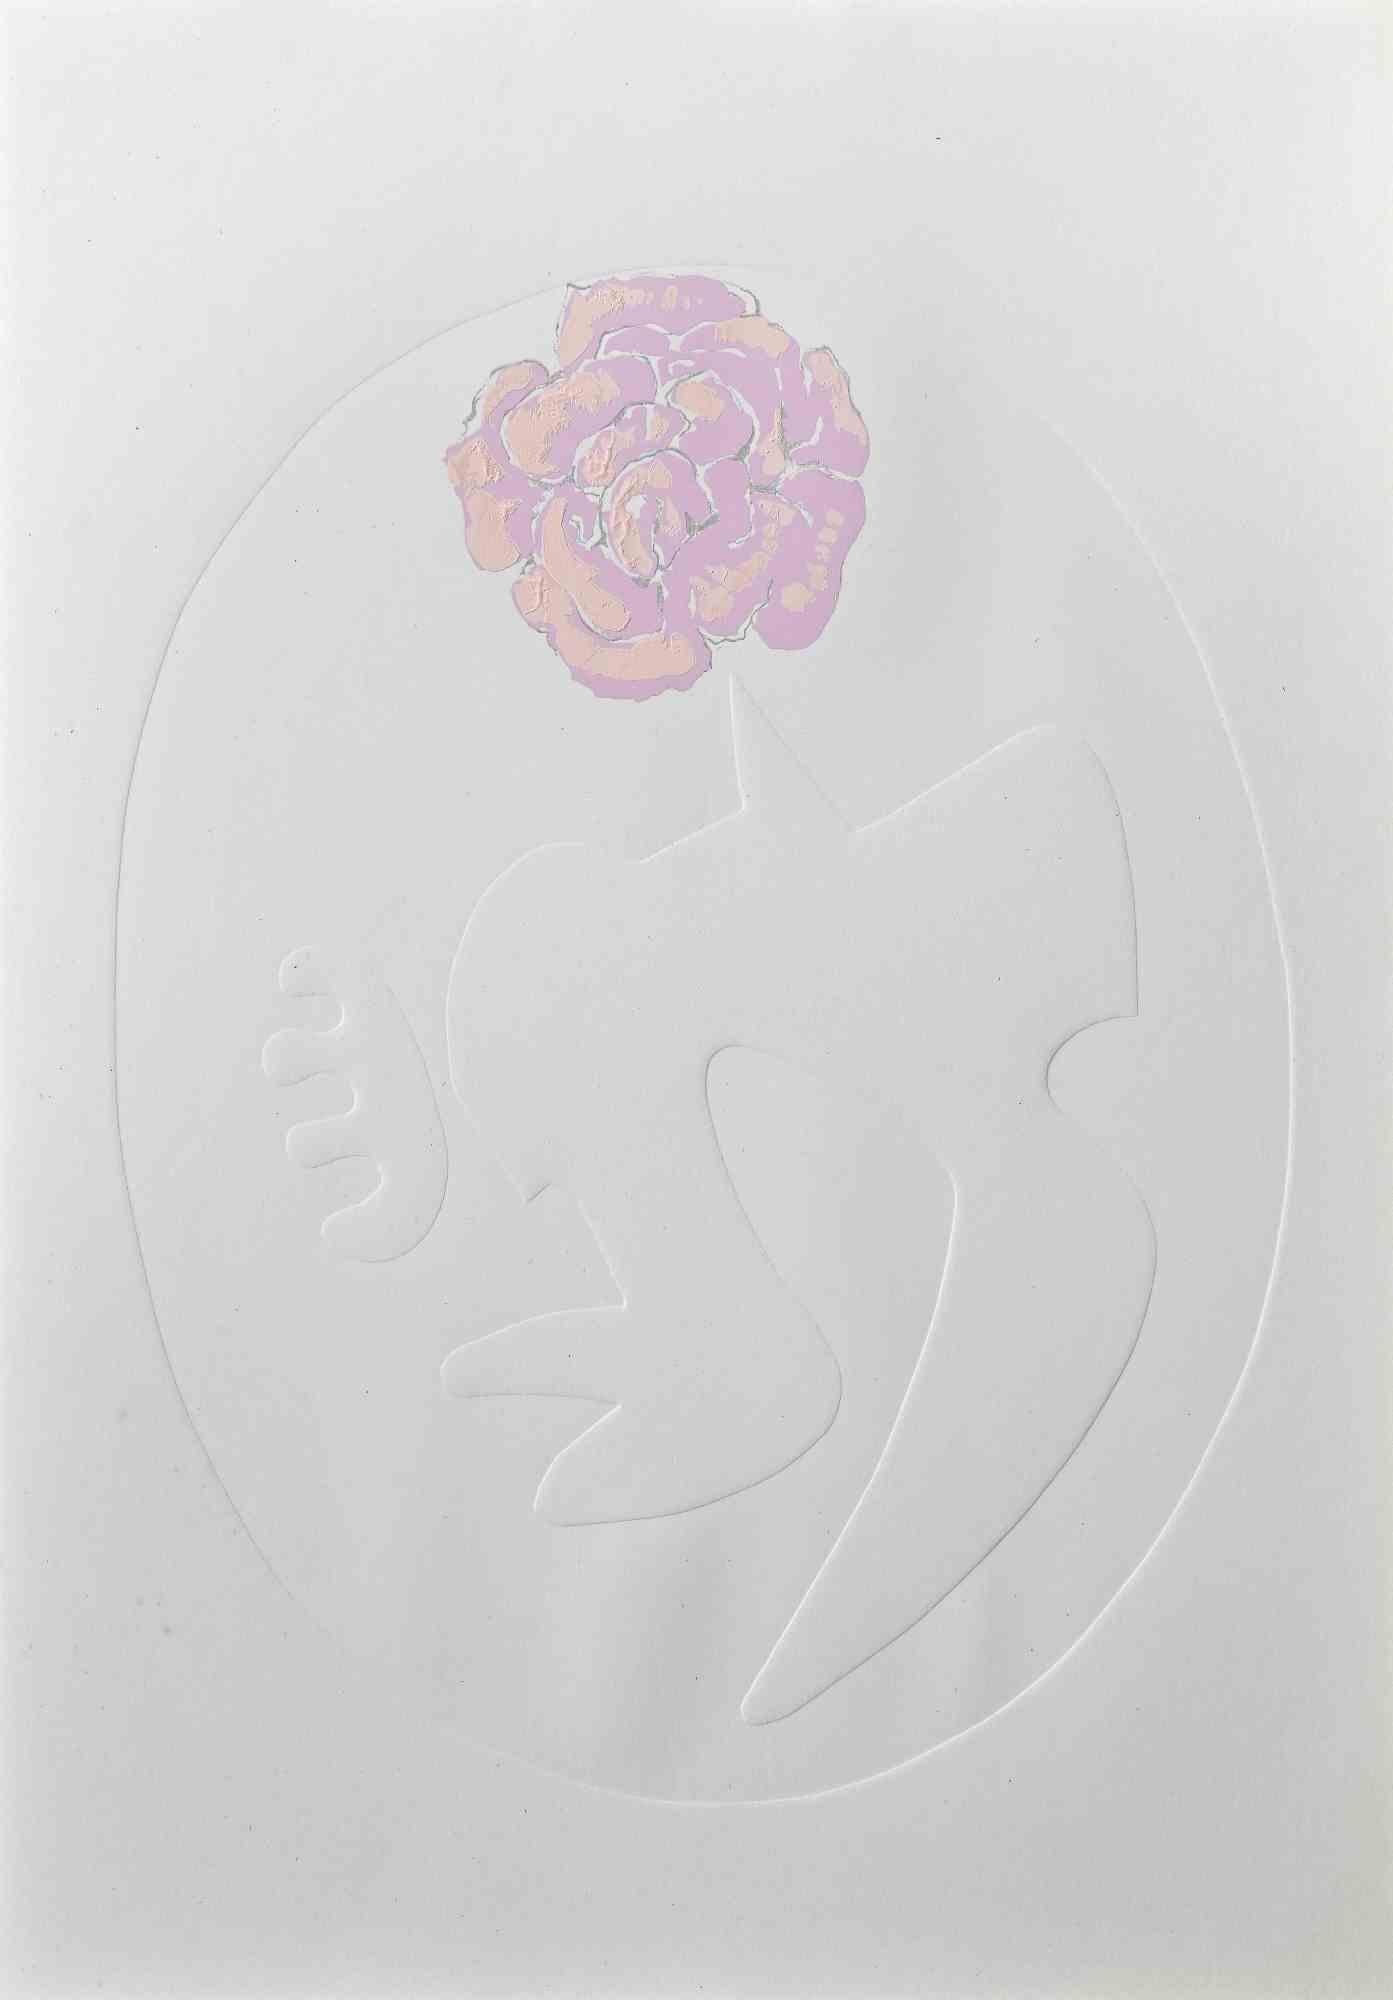 Pink Rose is an Screen Print and Embossing realized by Leo Guida in 1971s.

Good condition, proof artist.

No signature.

Artist sensitive to current issues, artistic movements and historical techniques, Leo Guida has been able to weave a productive